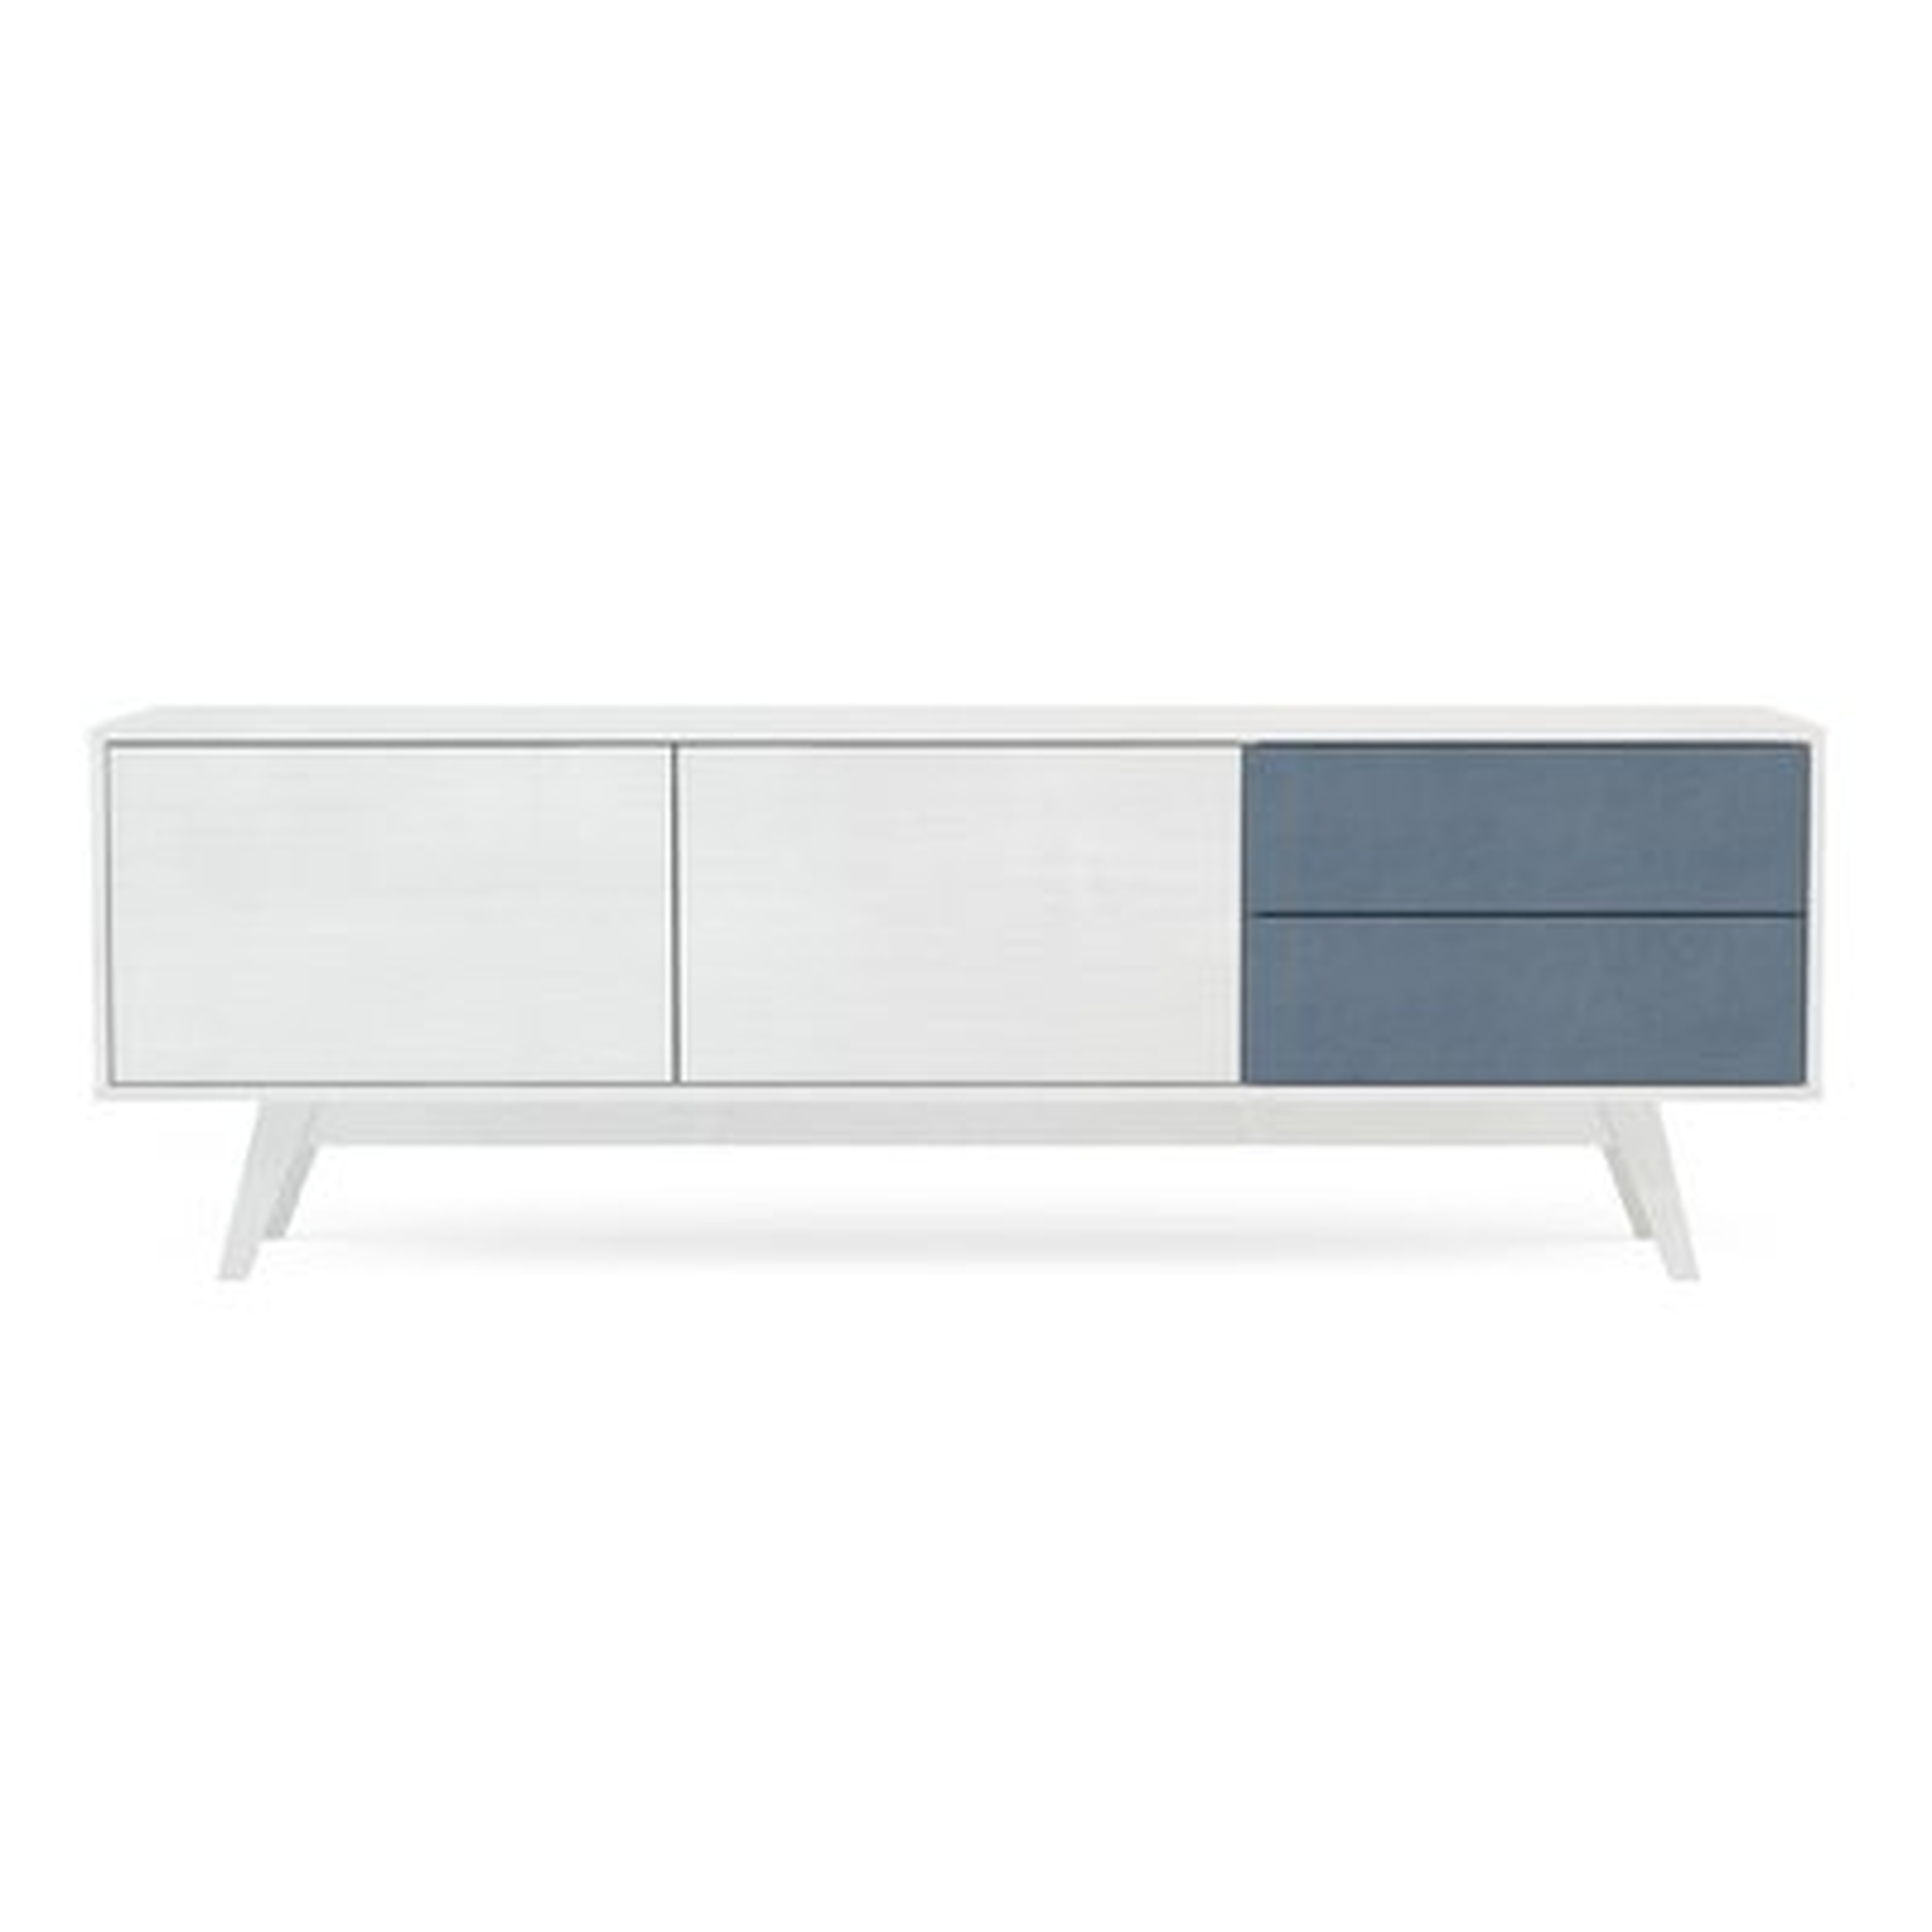 Kayla TV Stand for TVs up to 78 inches - AllModern